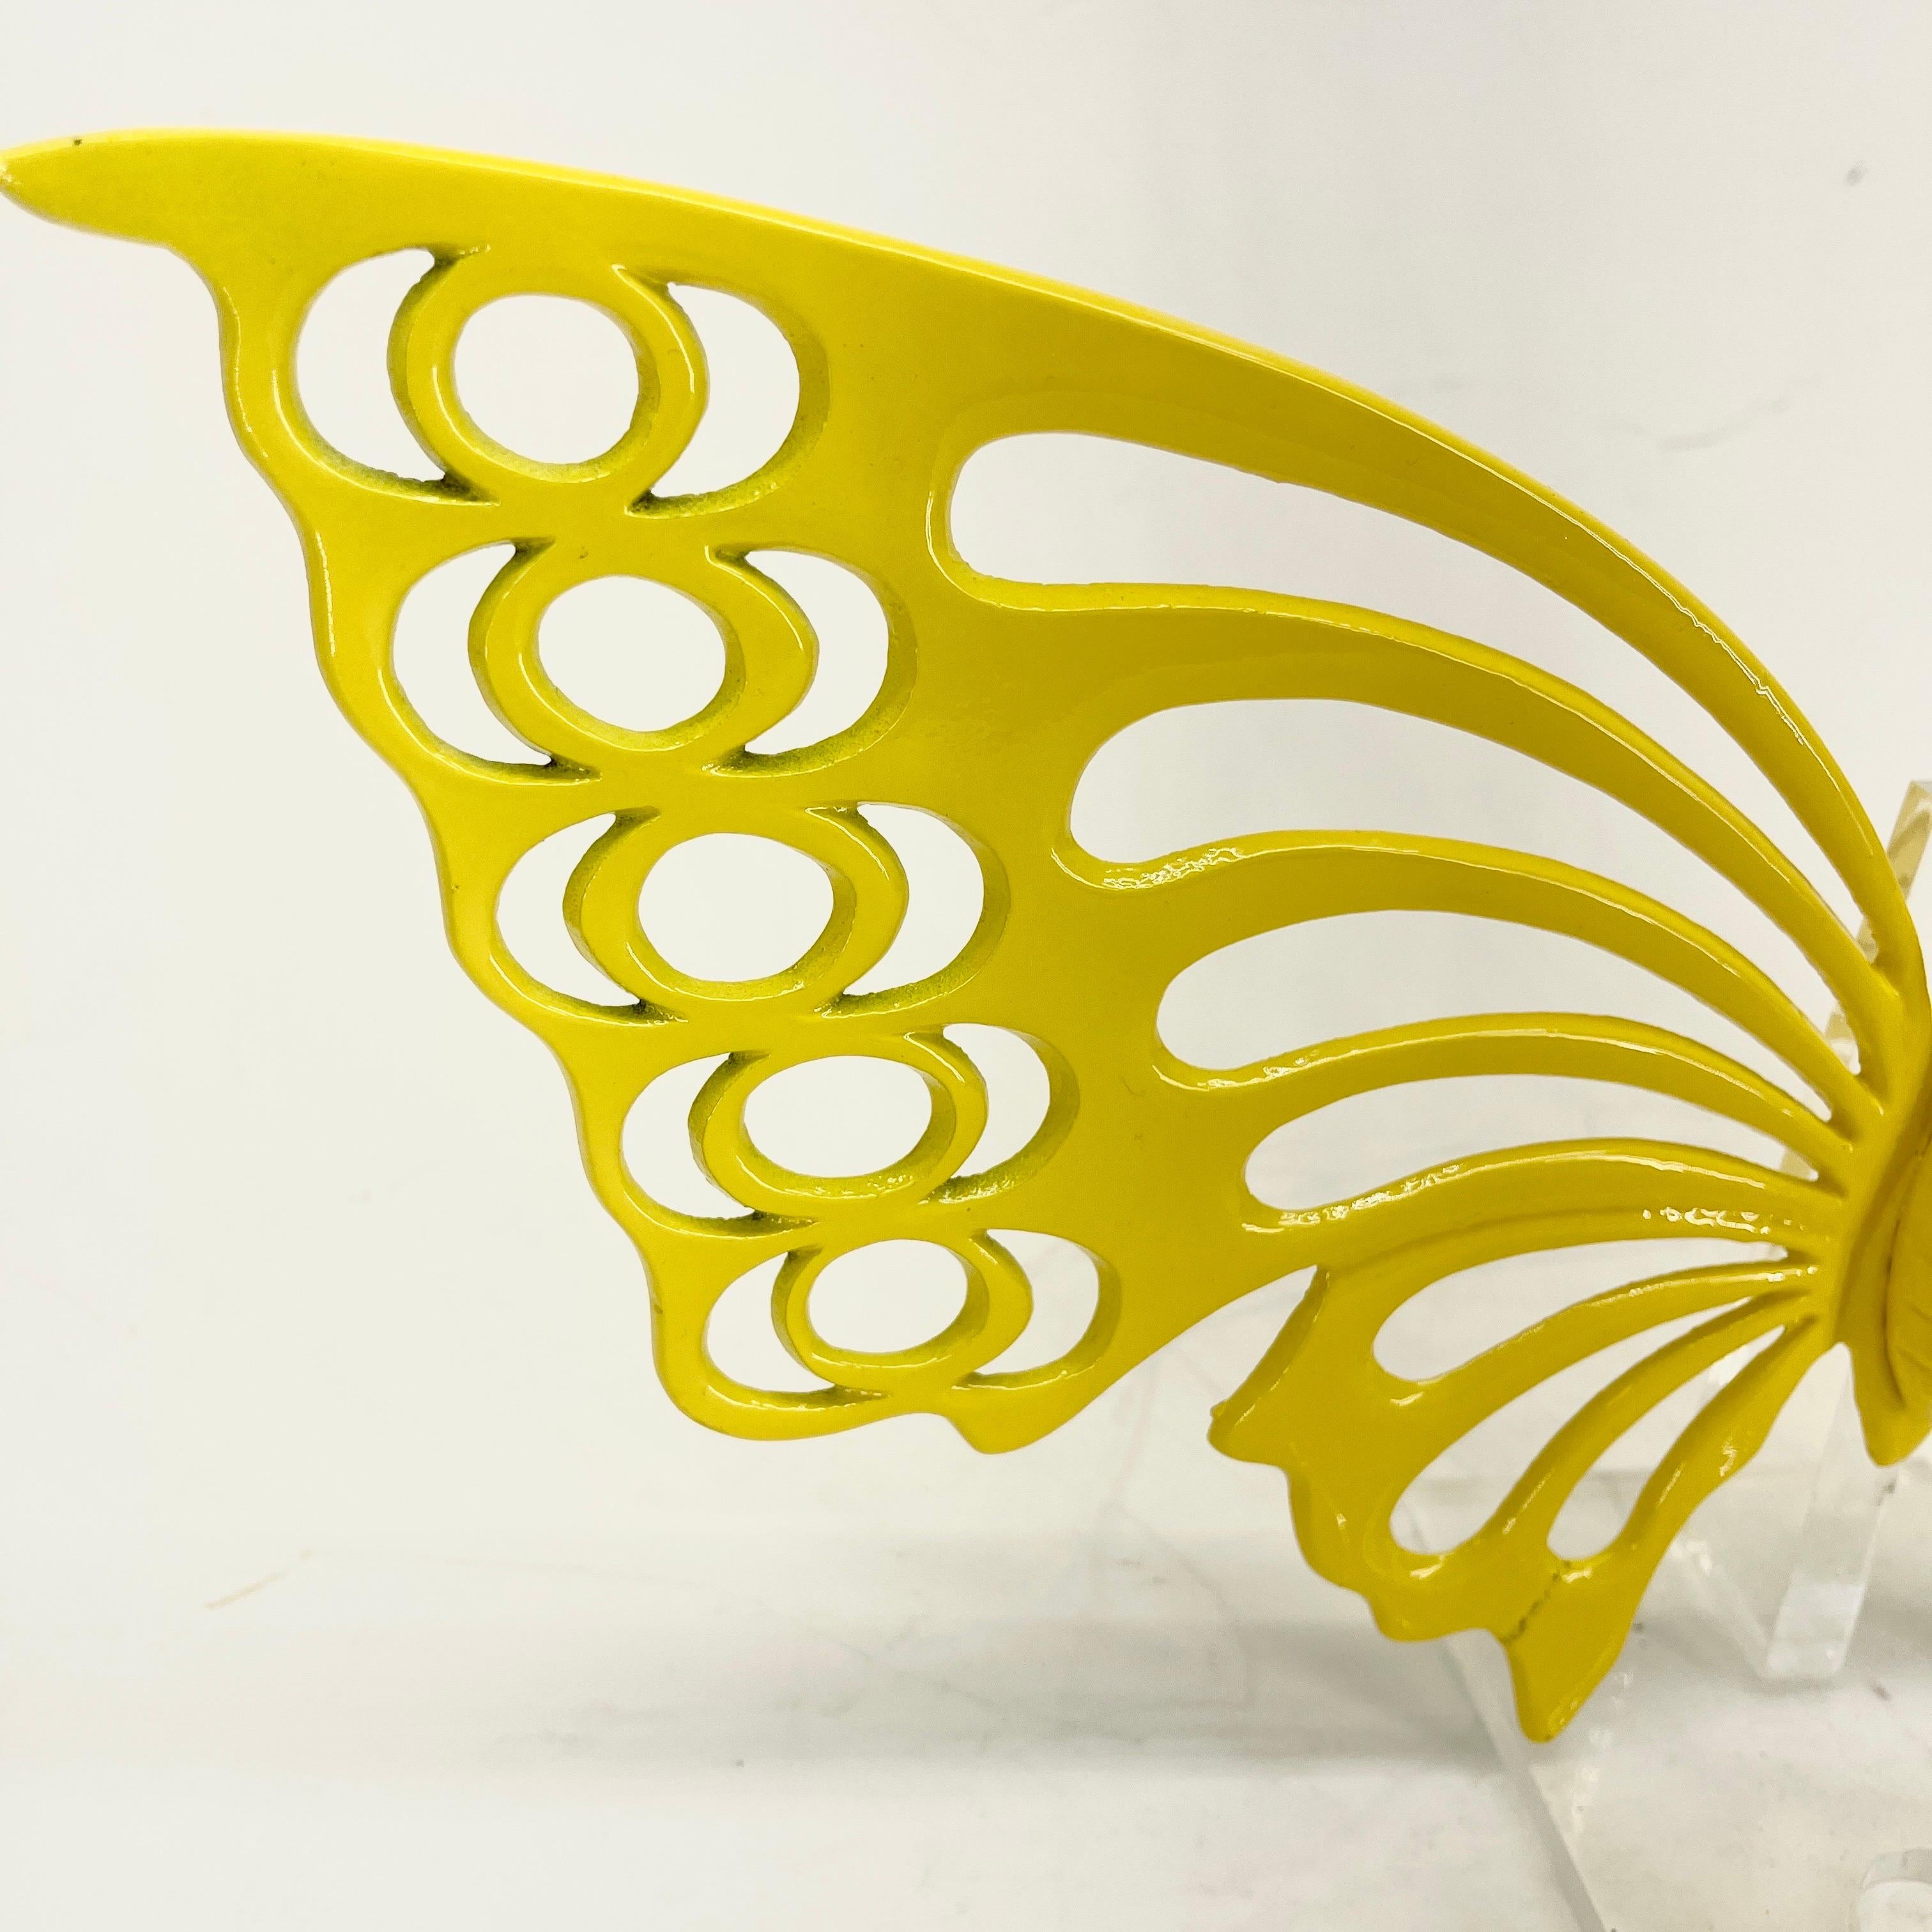 Large Brass Midcentury Butterfly Sculpture in Bright Yellow Powder-Coat For Sale 10